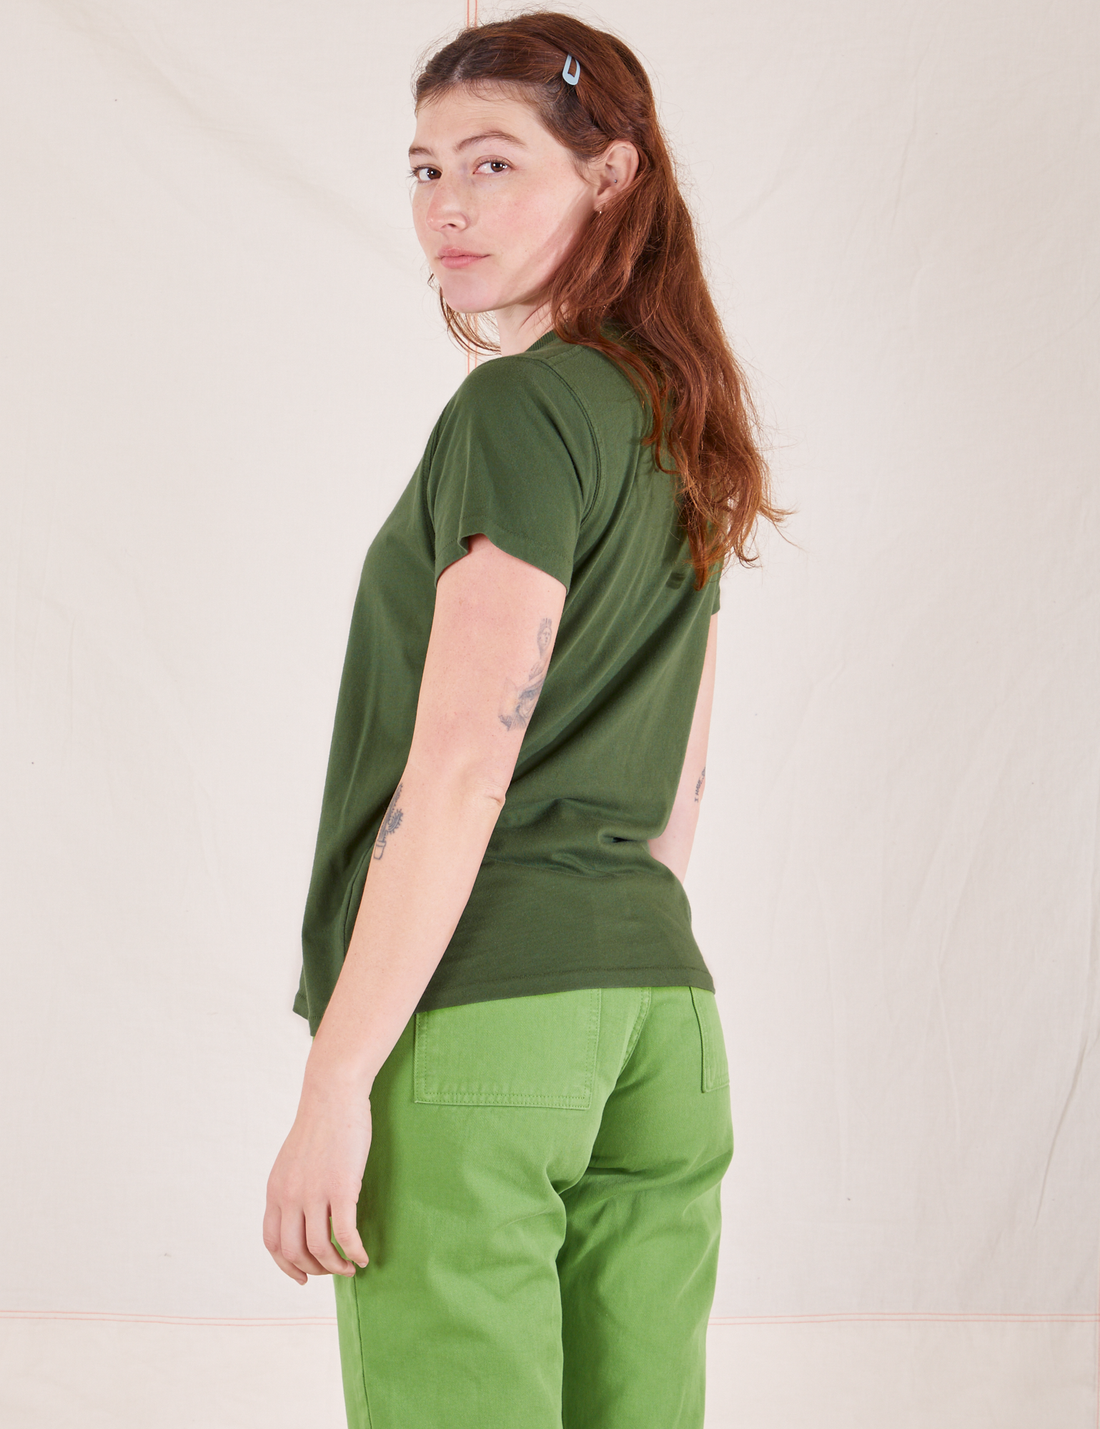 The Organic Vintage Tee in Dark Emerald Green back view on Alex wearing bright olive Western Pants